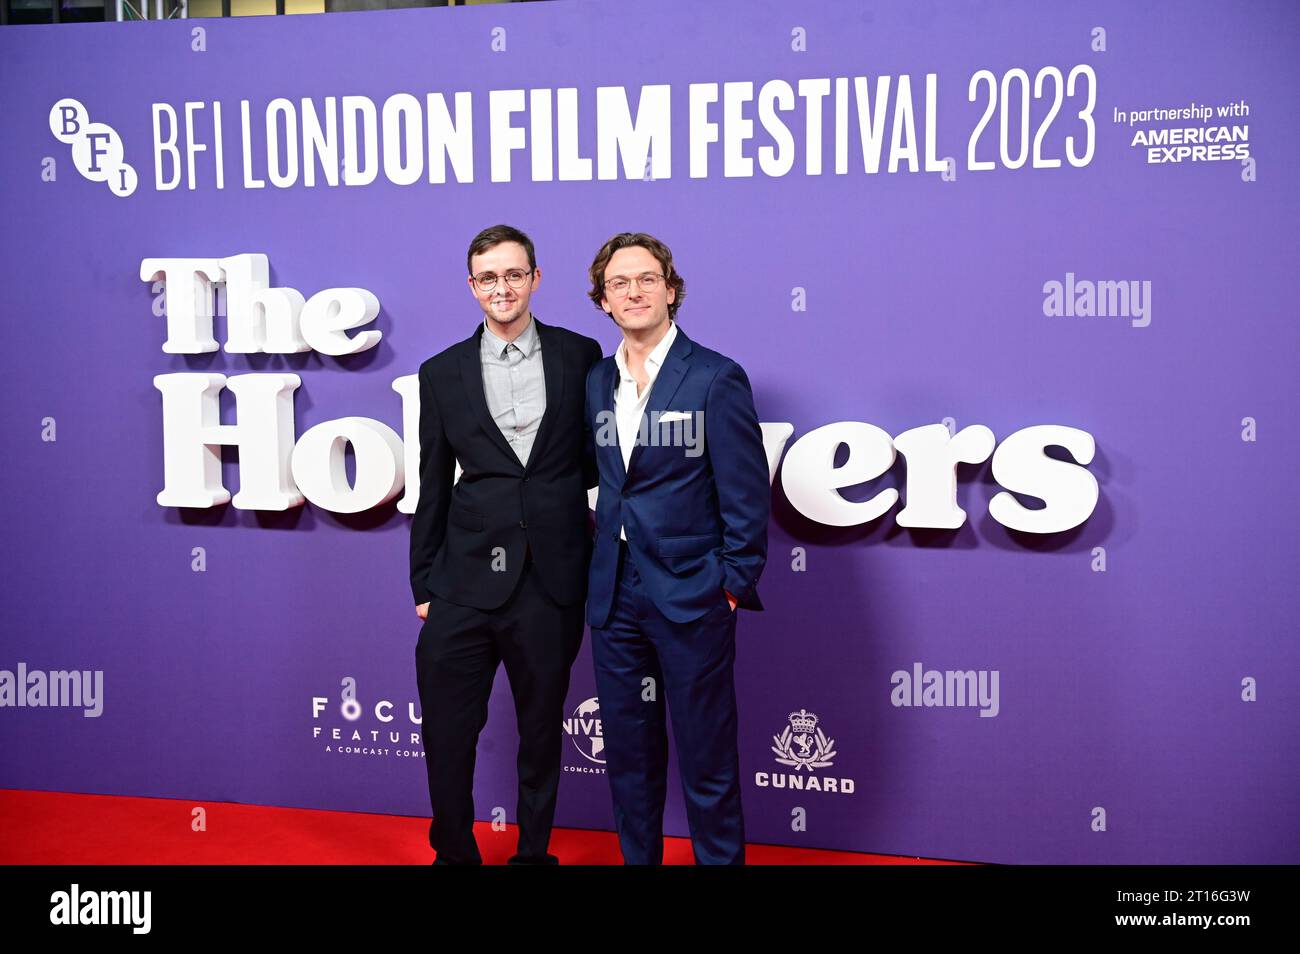 Royal Festival Hall, London, UK. 11th Oct, 2023. Ciaran O'Brien (L) and Jack Howard attends the European Premiere and Cunard Gala screening of The Holdovers at the BFI London Film Festival in partnership with American Express - 67th BFI London Film Festival 2023, London, UK Credit: See Li/Picture Capital/Alamy Live News Stock Photo